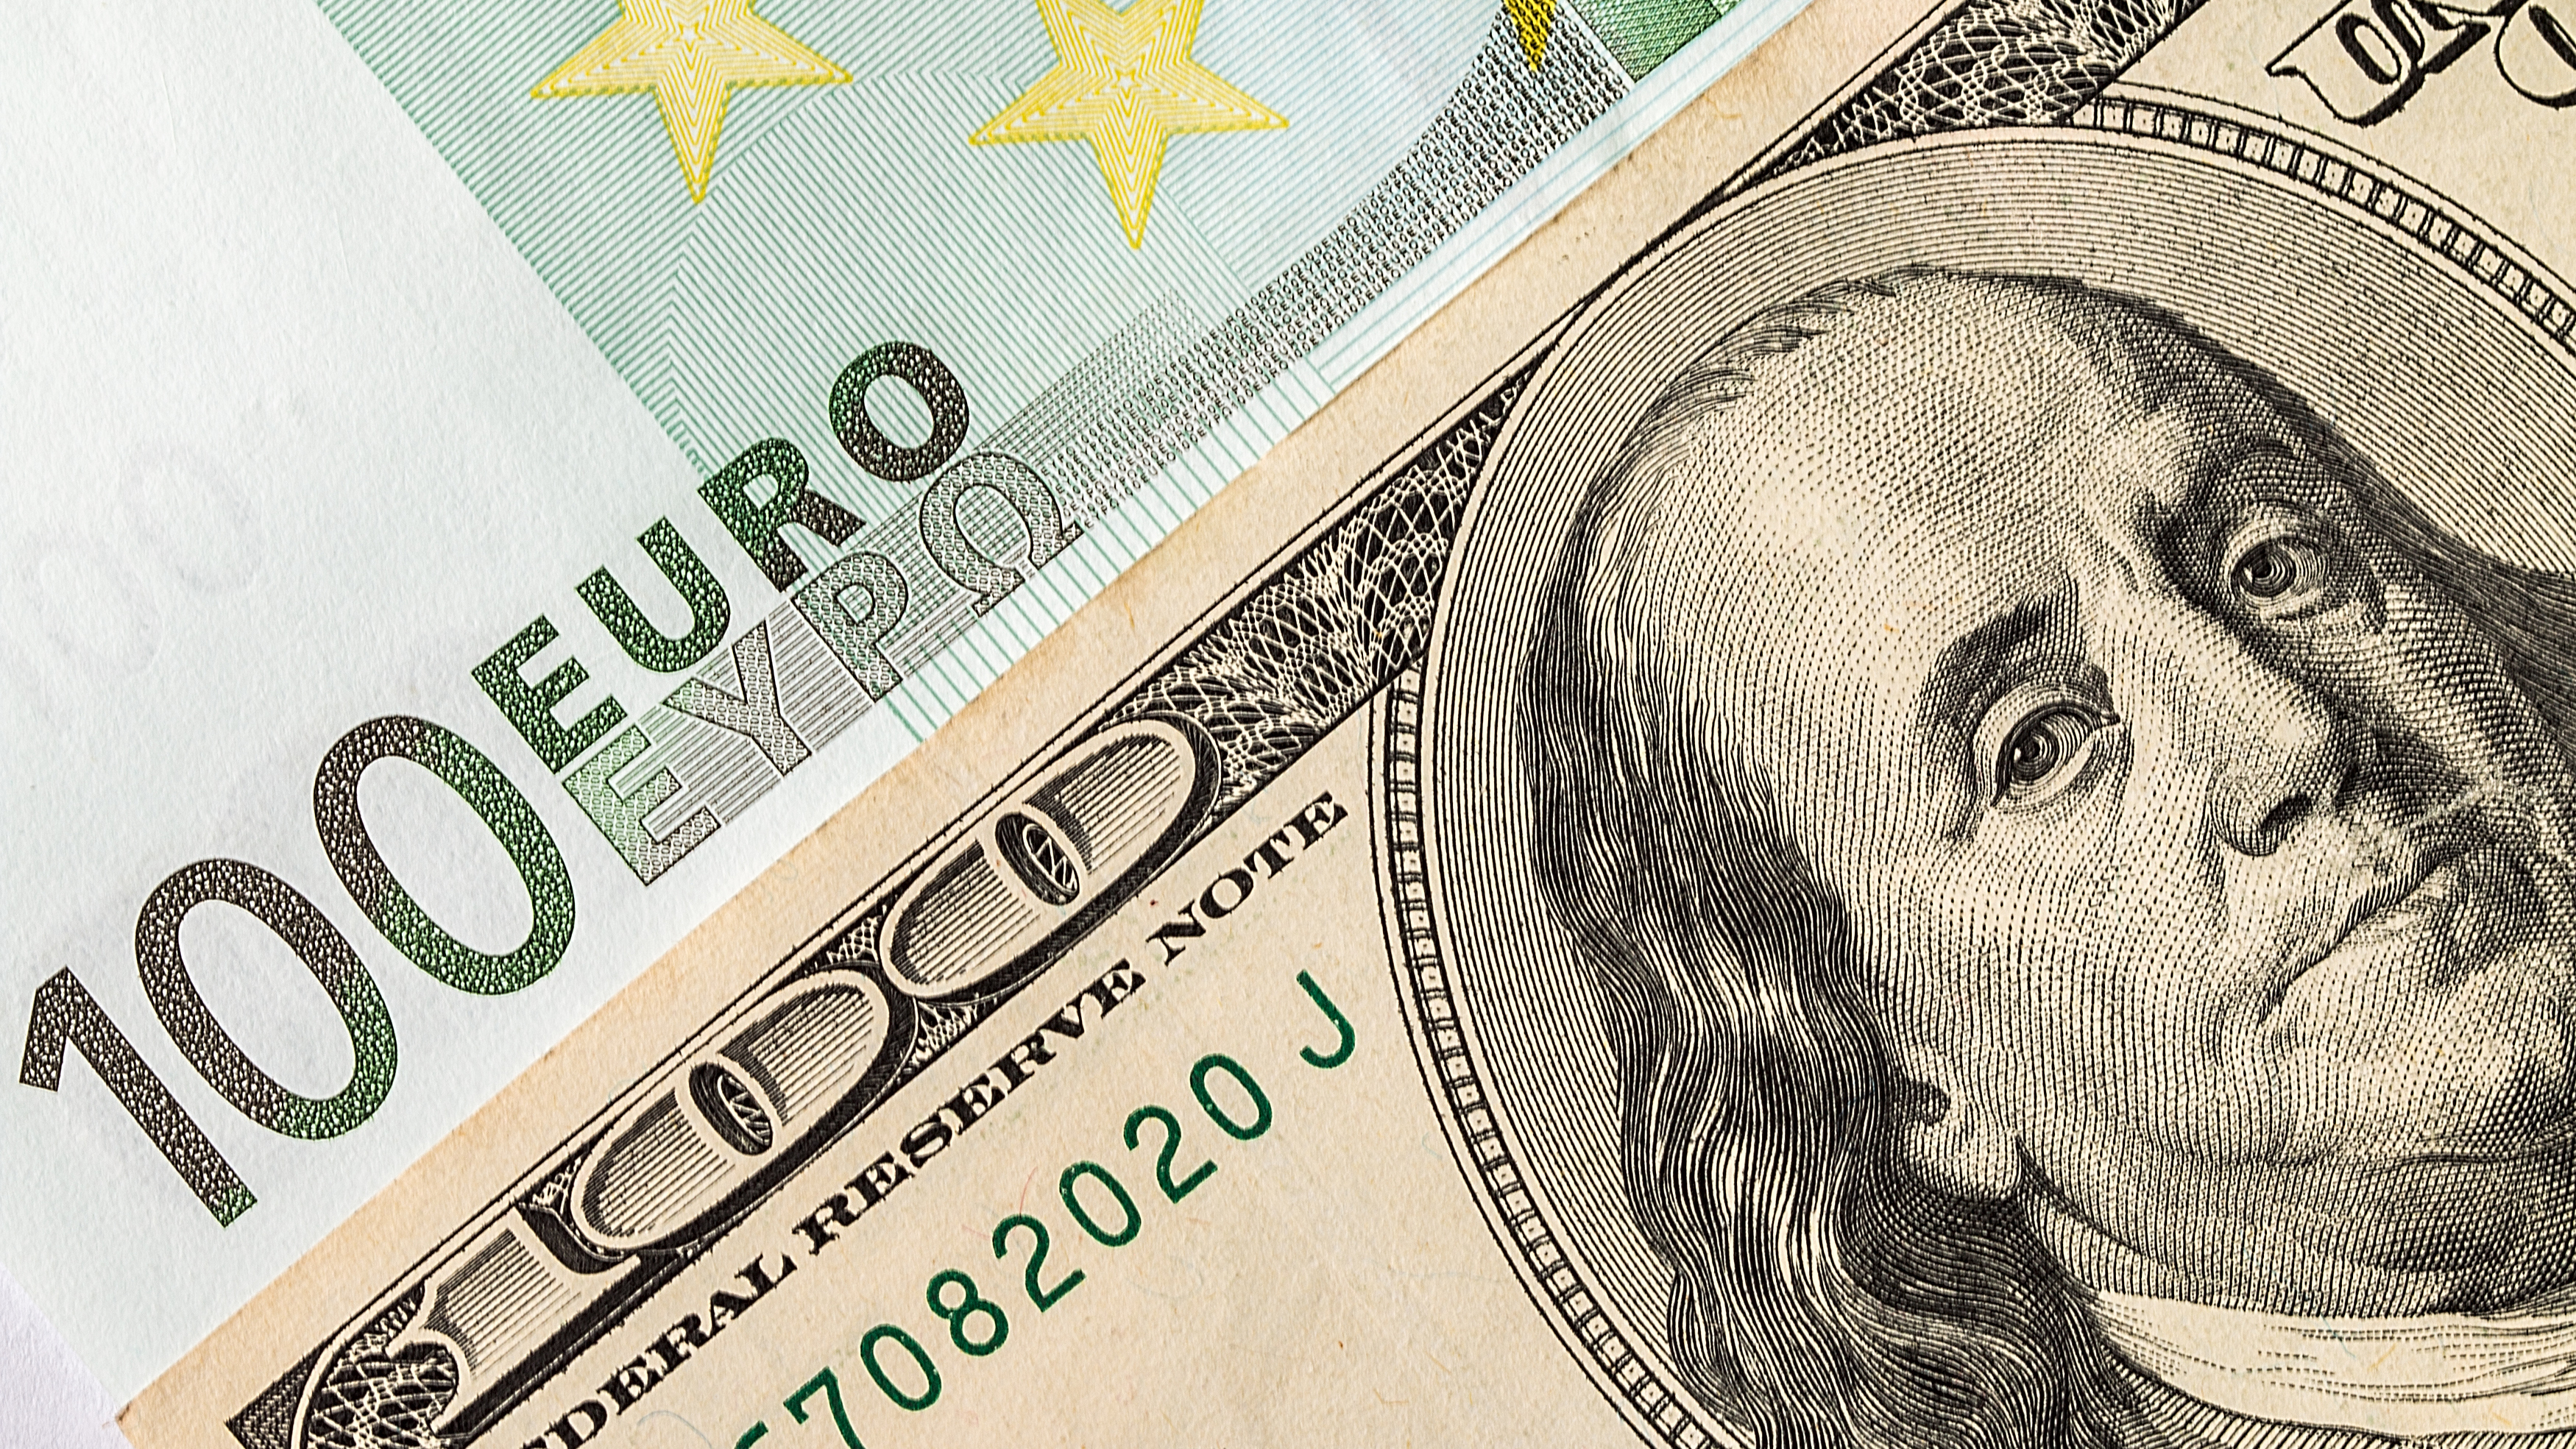 Here's a European stock that stands to benefit from strong U.S. dollar